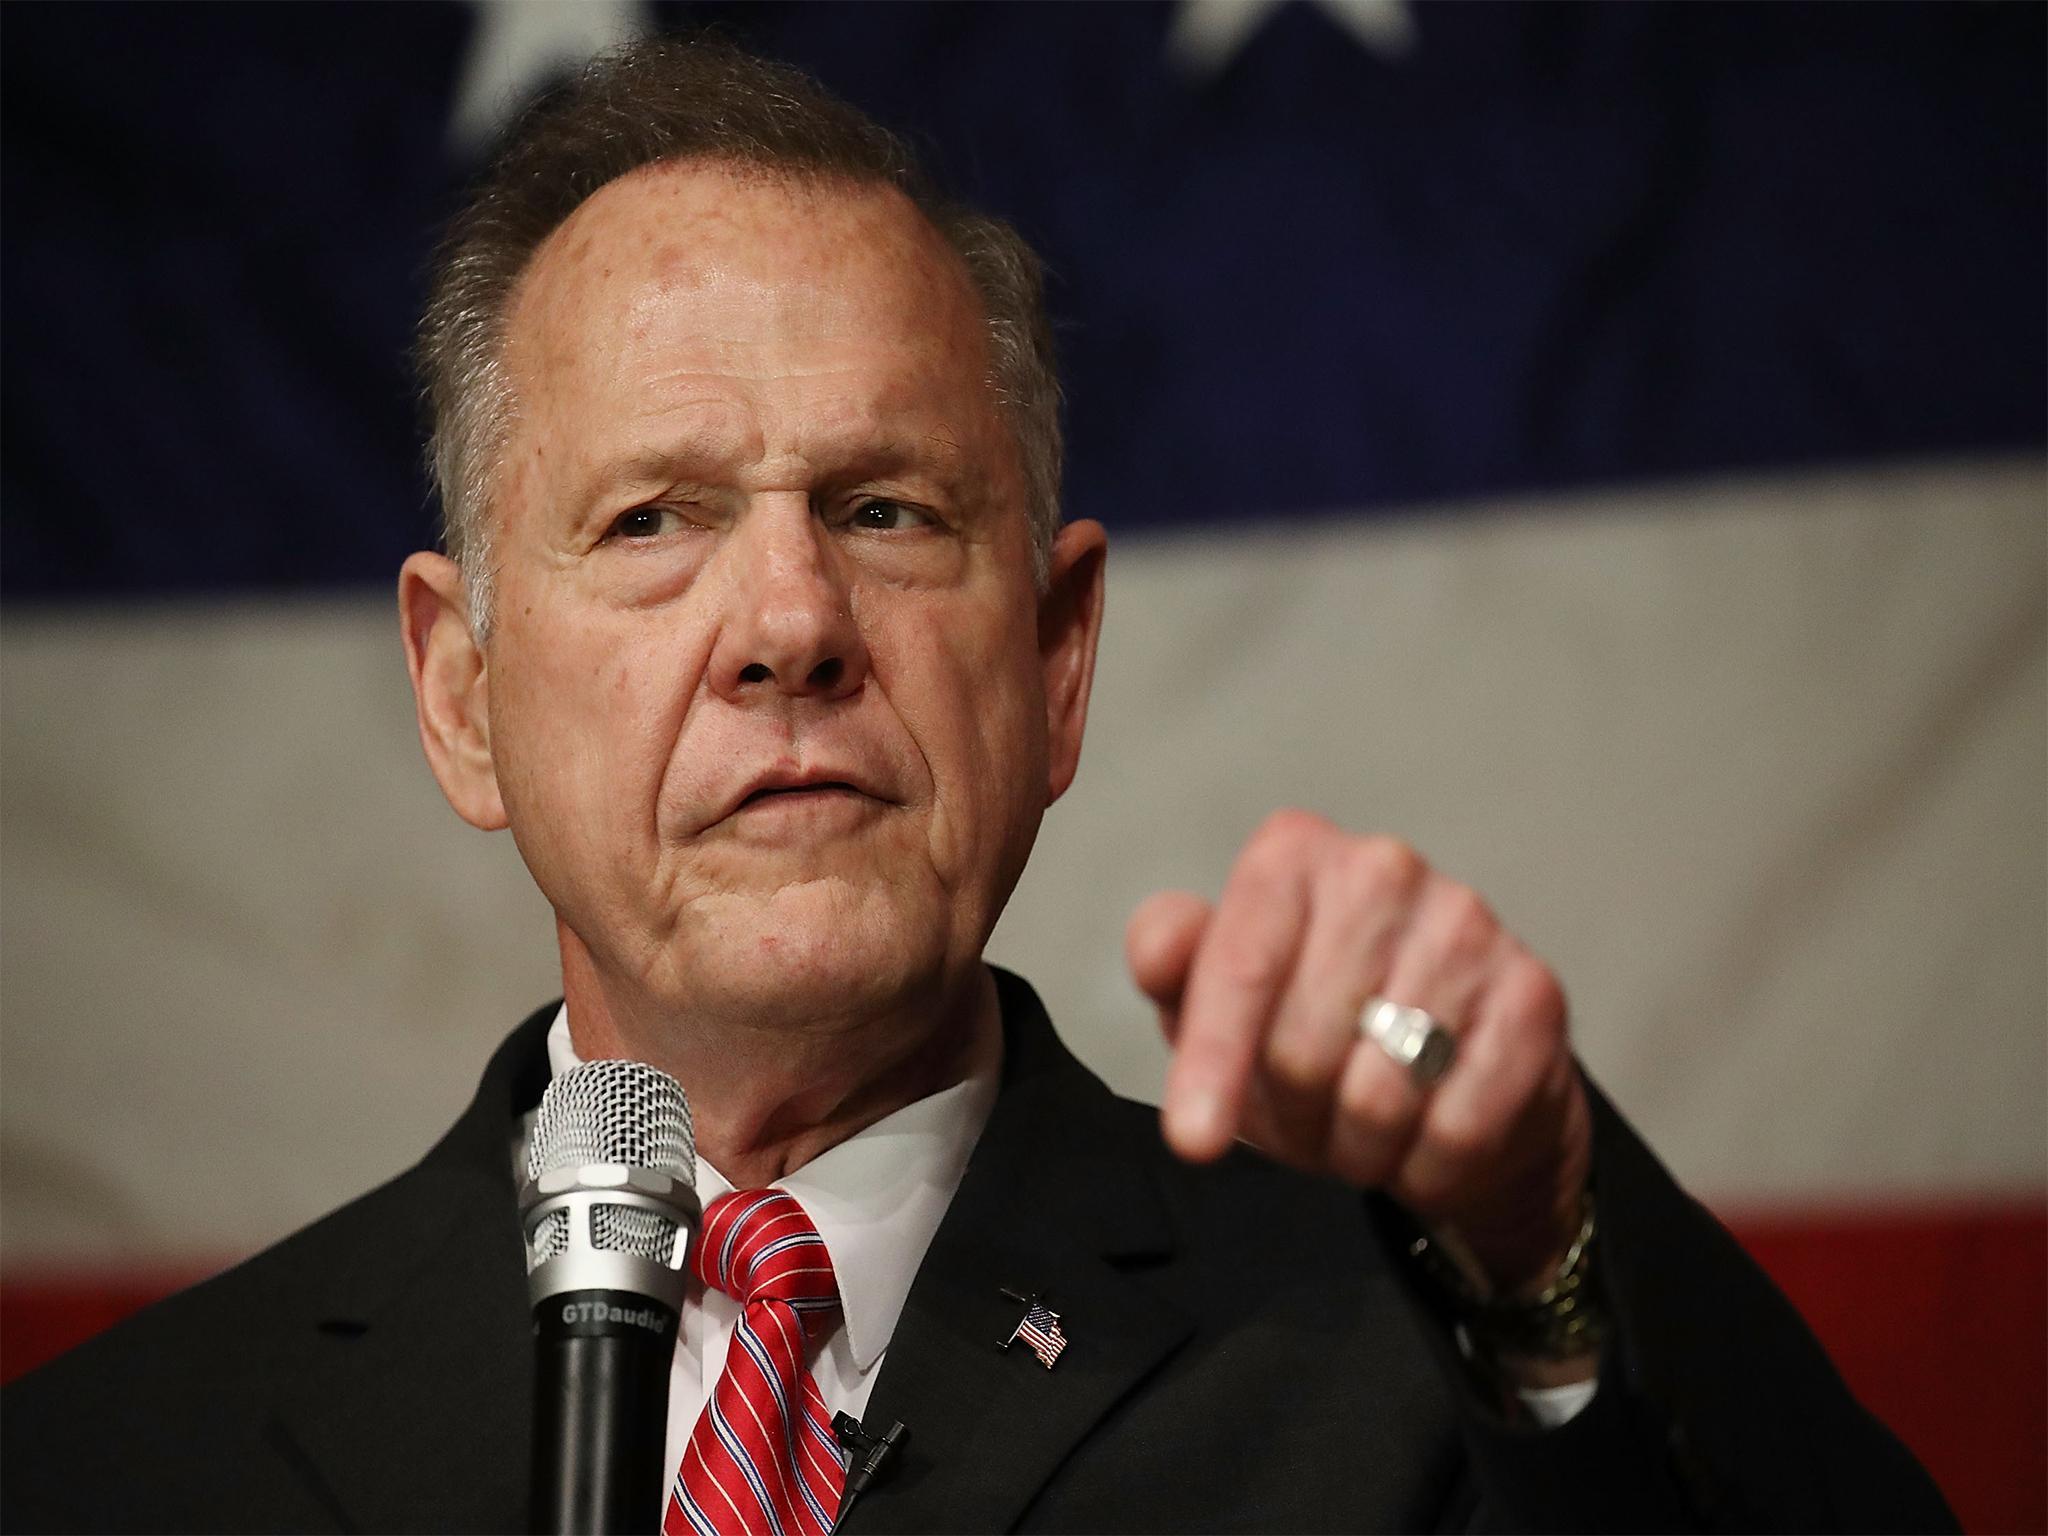 The RNC had initially withdrew its support for Moore last month, after allegations of sexual misconduct